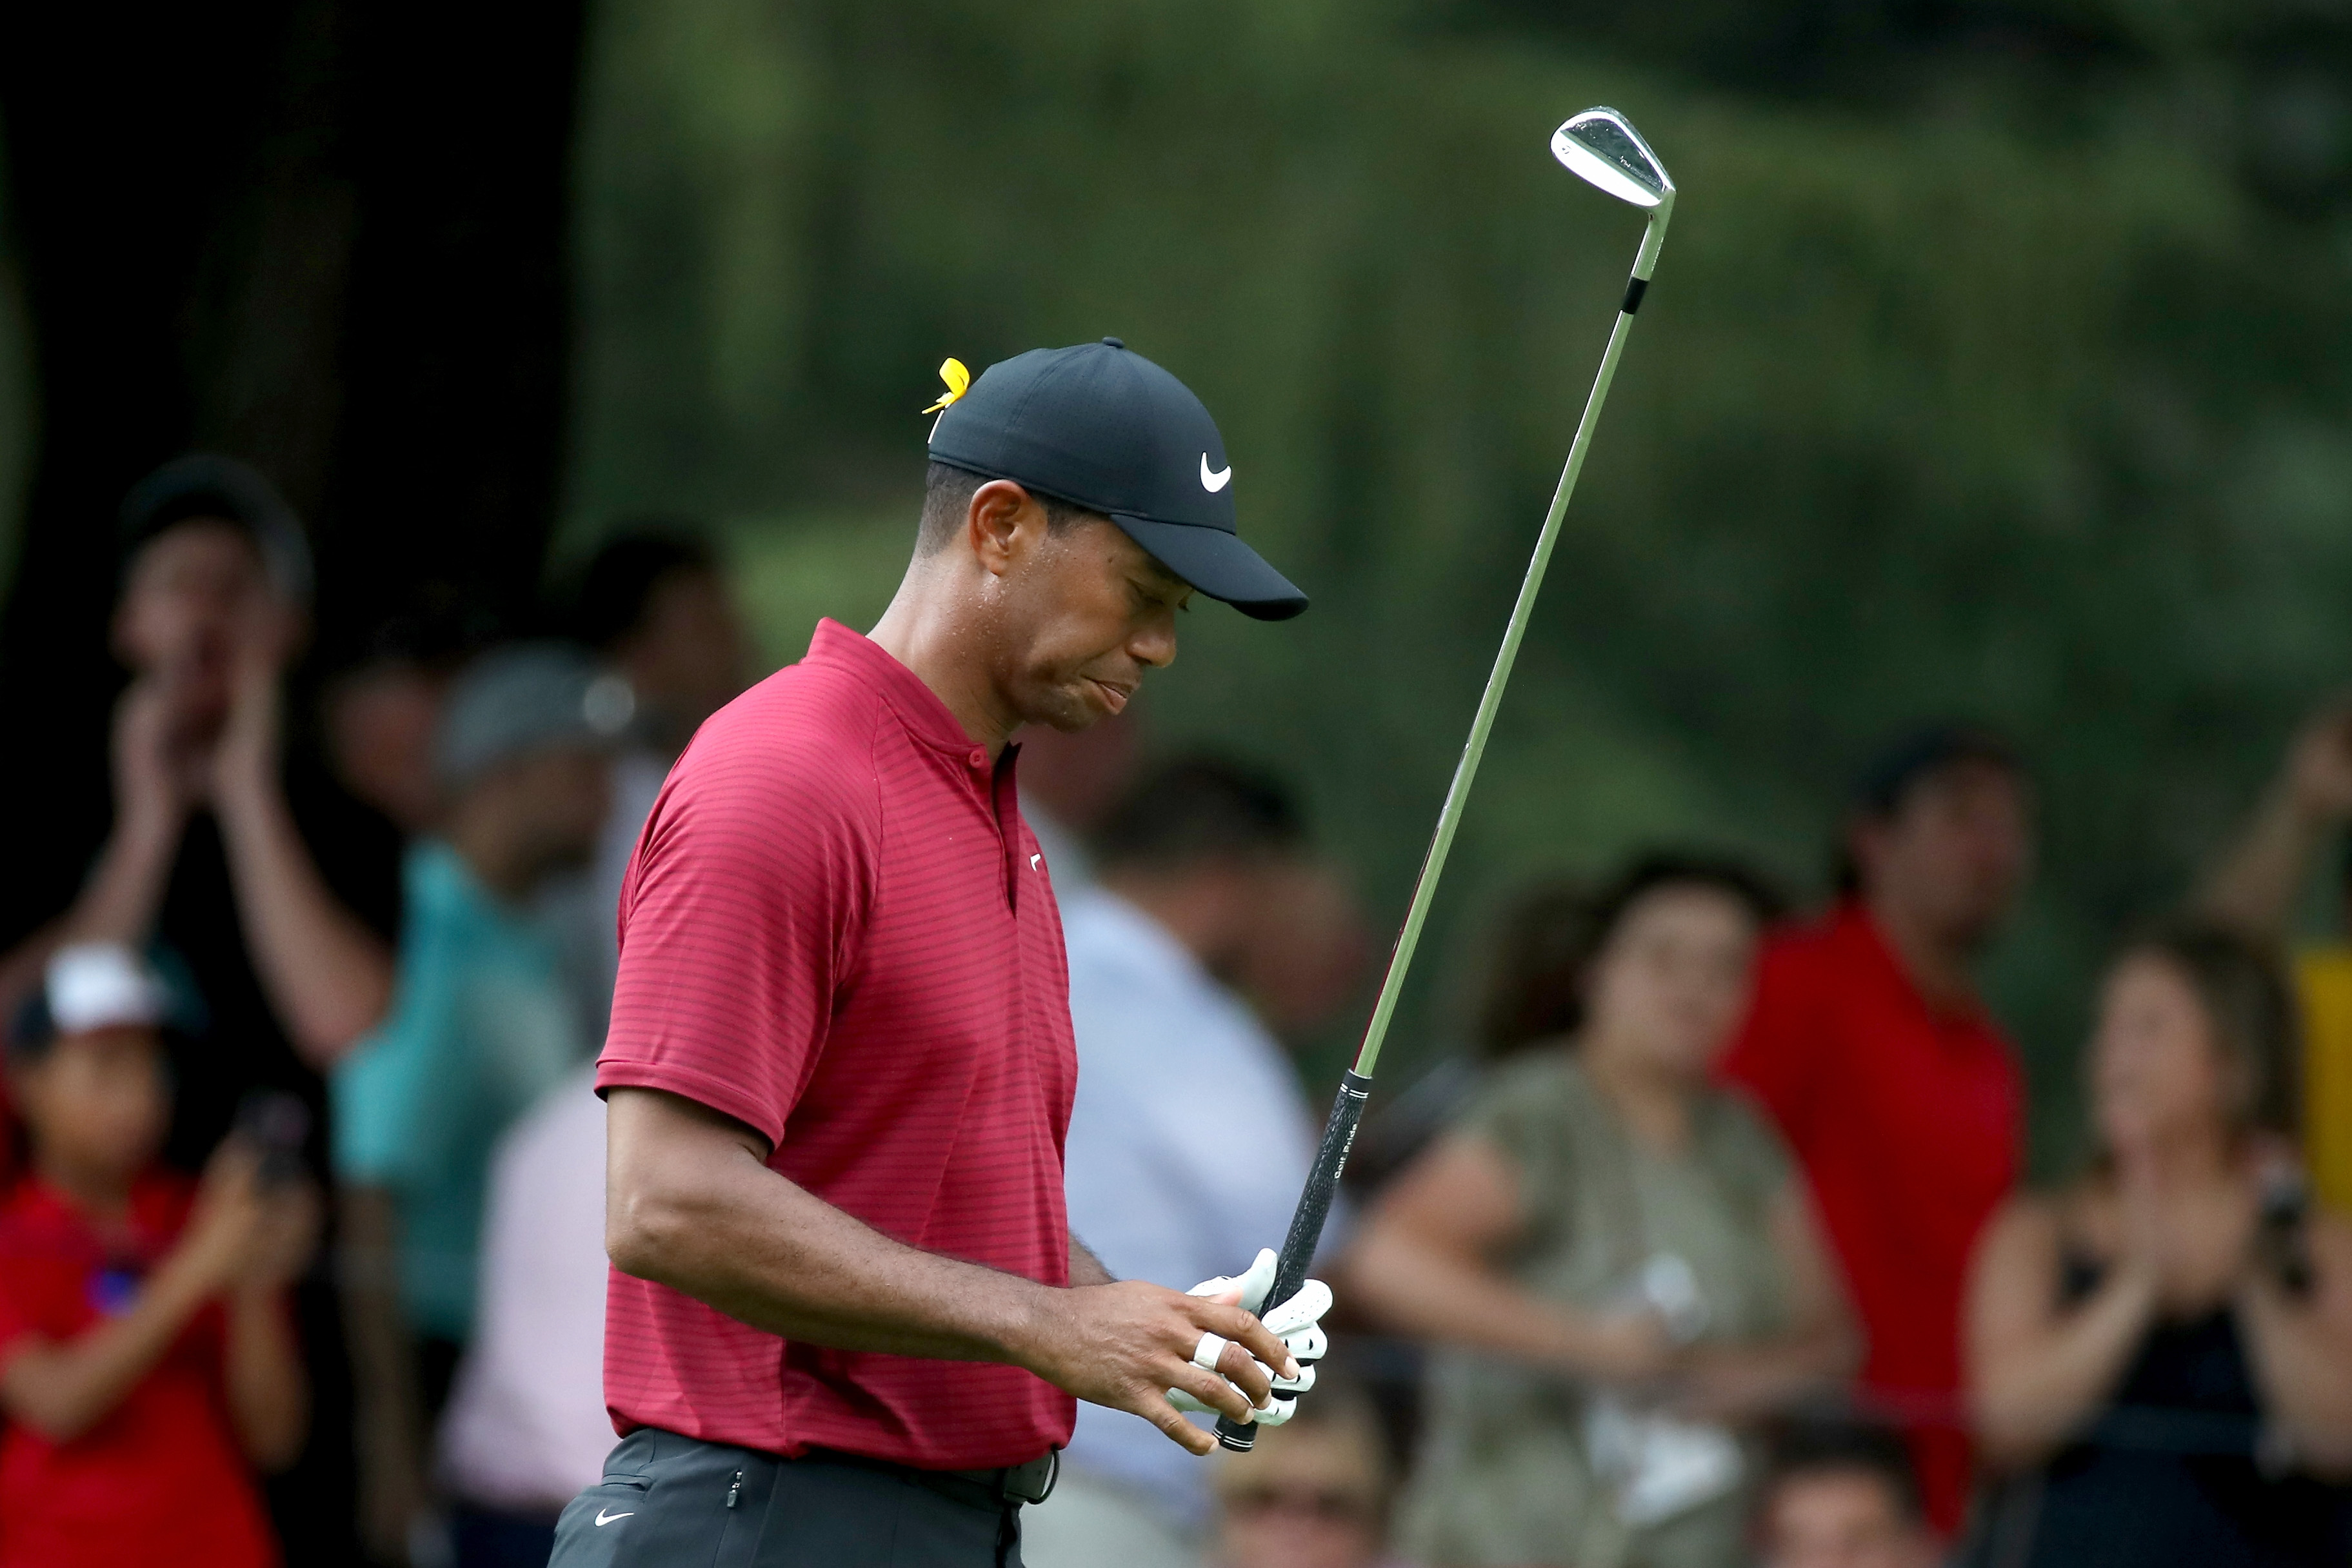 Tiger Woods: It was either going to be 62, 72 or in the mid 70s